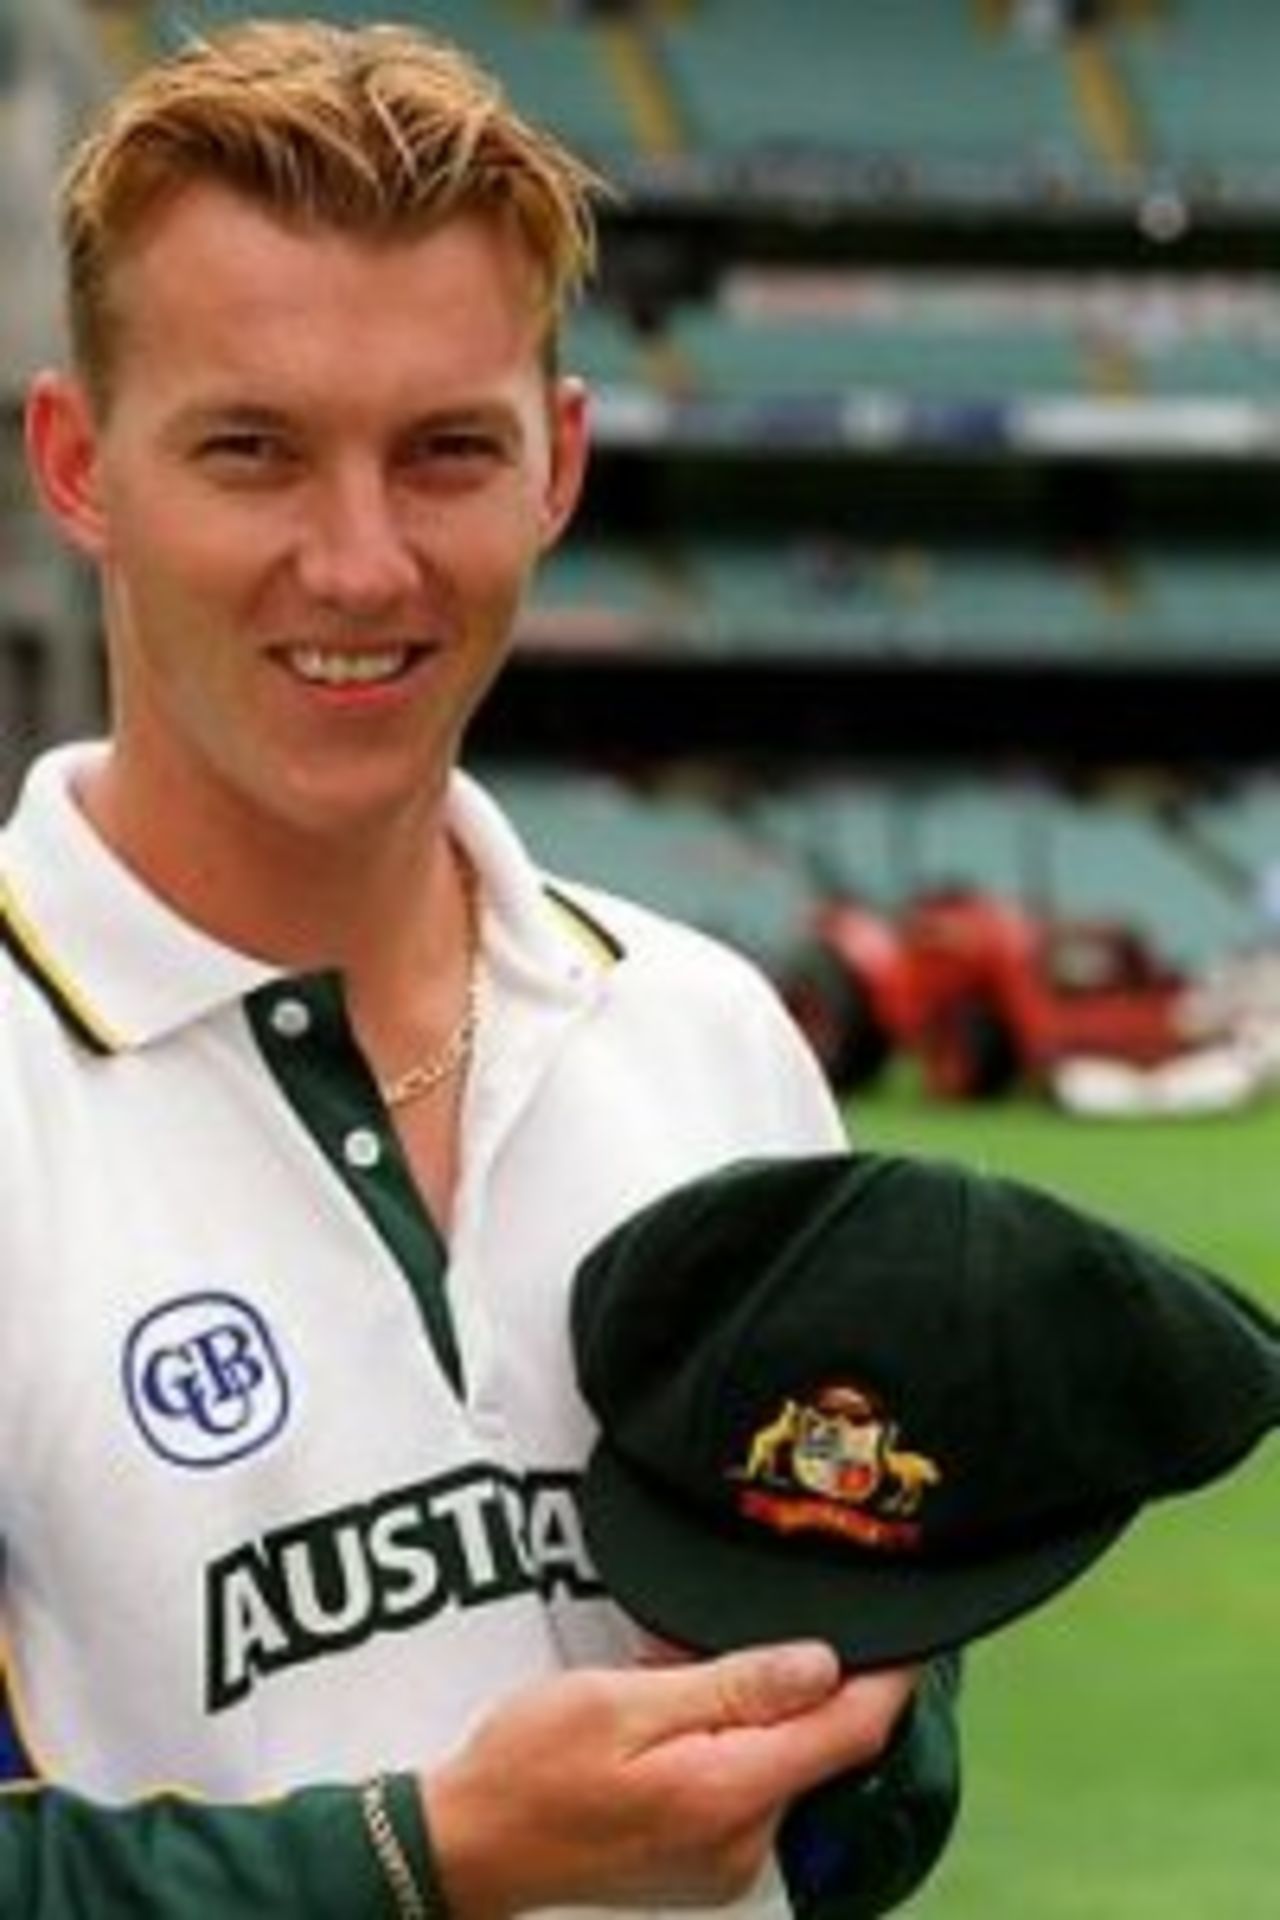 26 Dec 1999: Test debutant Brett Lee of Australia is presented with his baggy green cap before the Boxing Day Cricket Test match between Australia and India at the Melbourne Cricket Ground, Melbourne, Australia. Bad light stopped play with Australia on 3 for 138.